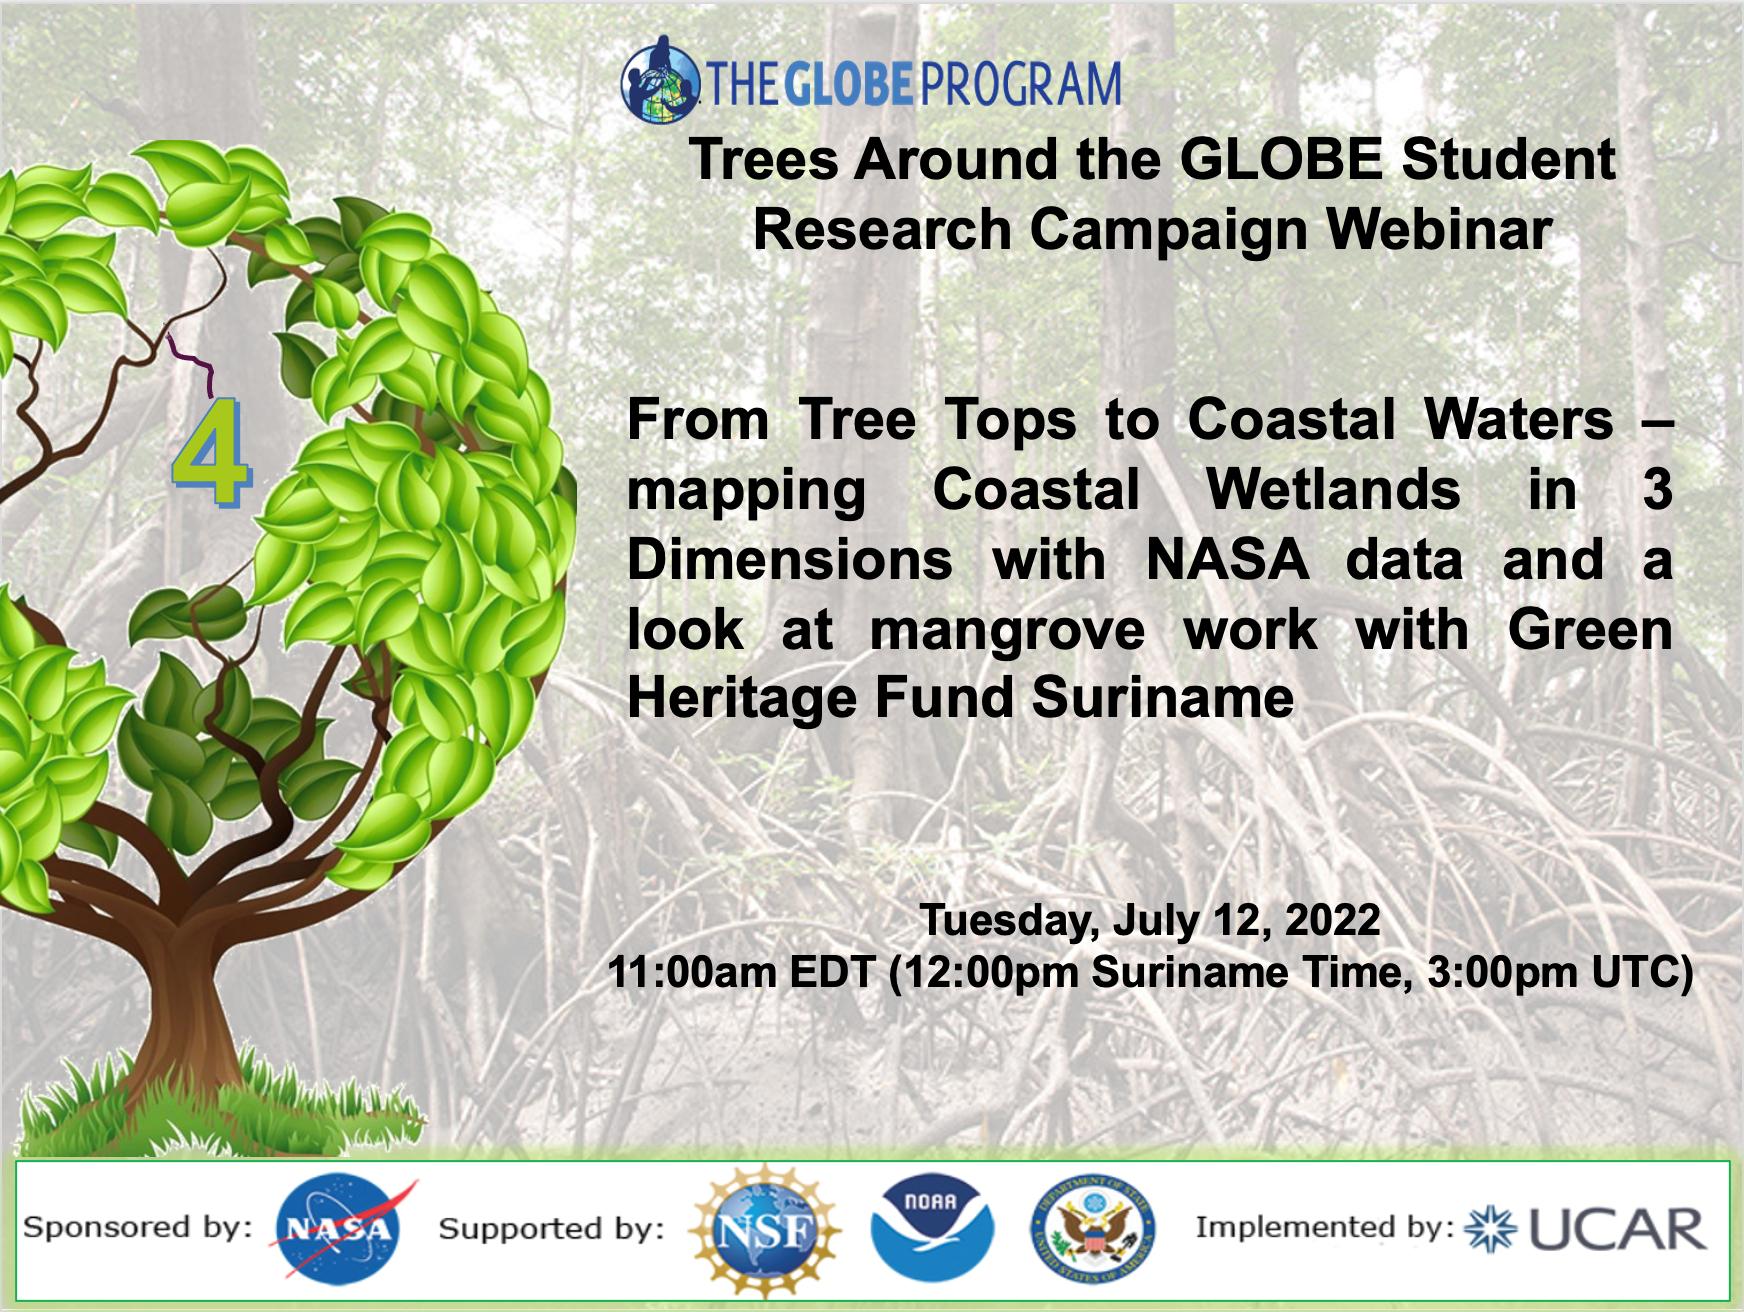 Trees Around the GLOBE Student Research Campaign 12 July webinar shareable, showing the title and time of the event